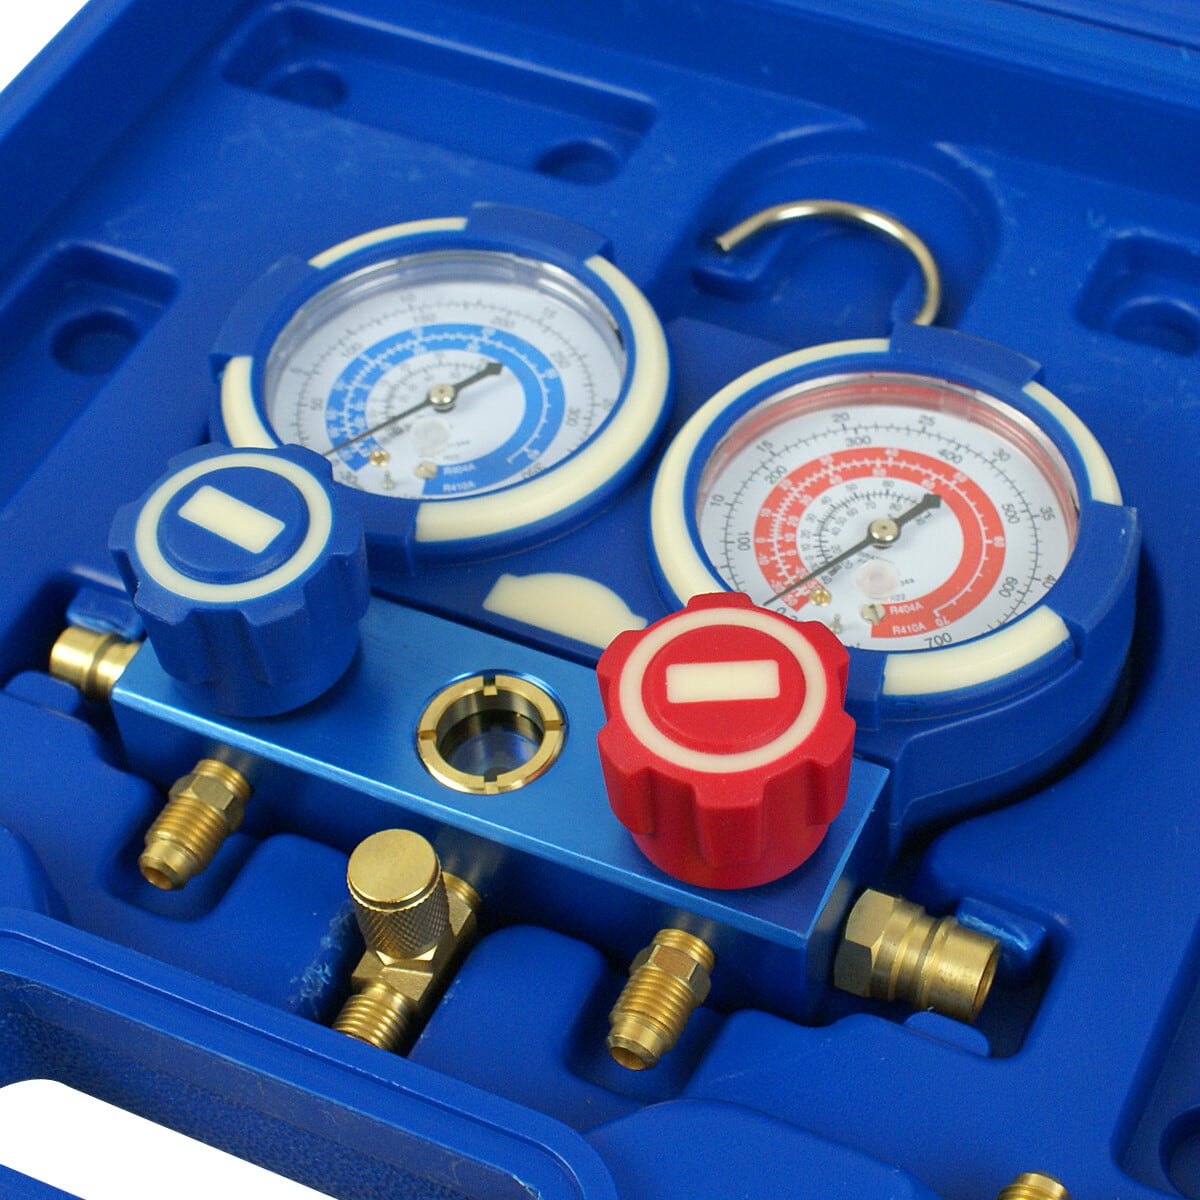 Deluxe Manifold Gauge Set R134a R410a R22 & Electronic Digital Refrigerant Scale 